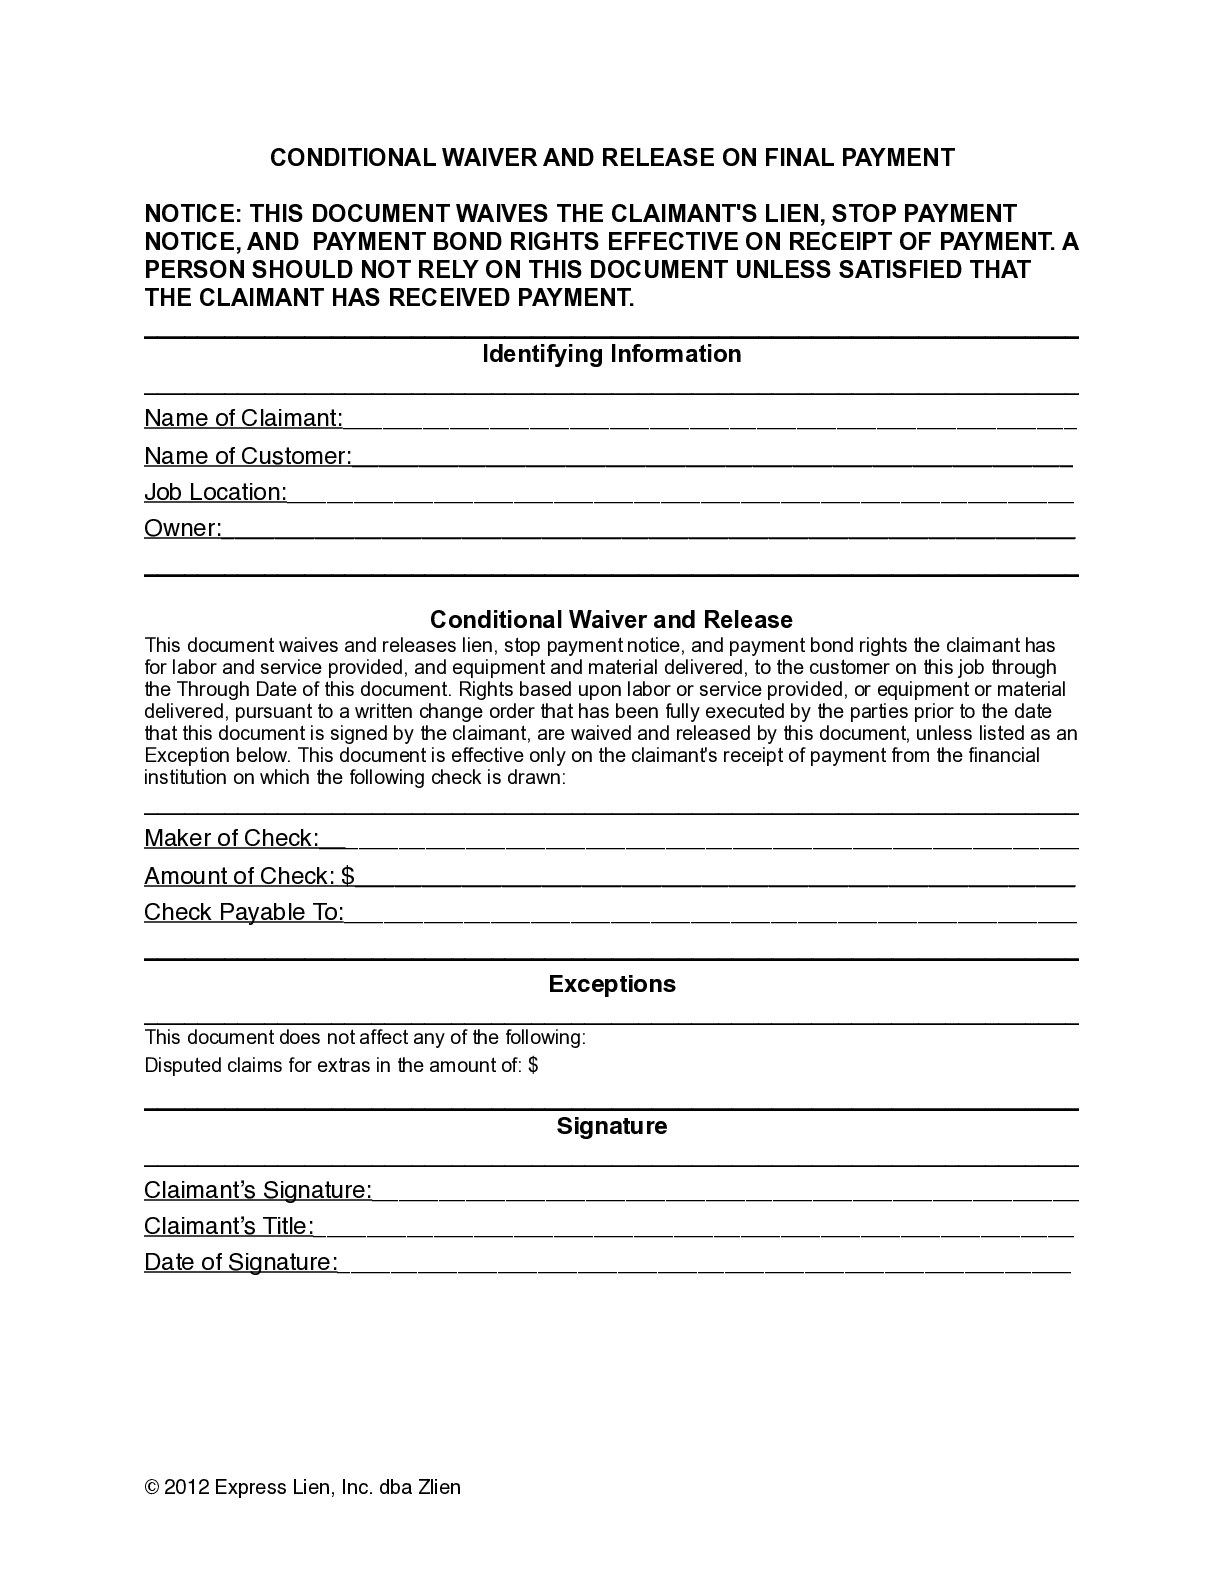 Ohio Final Conditional Lien Waiver Form - free from